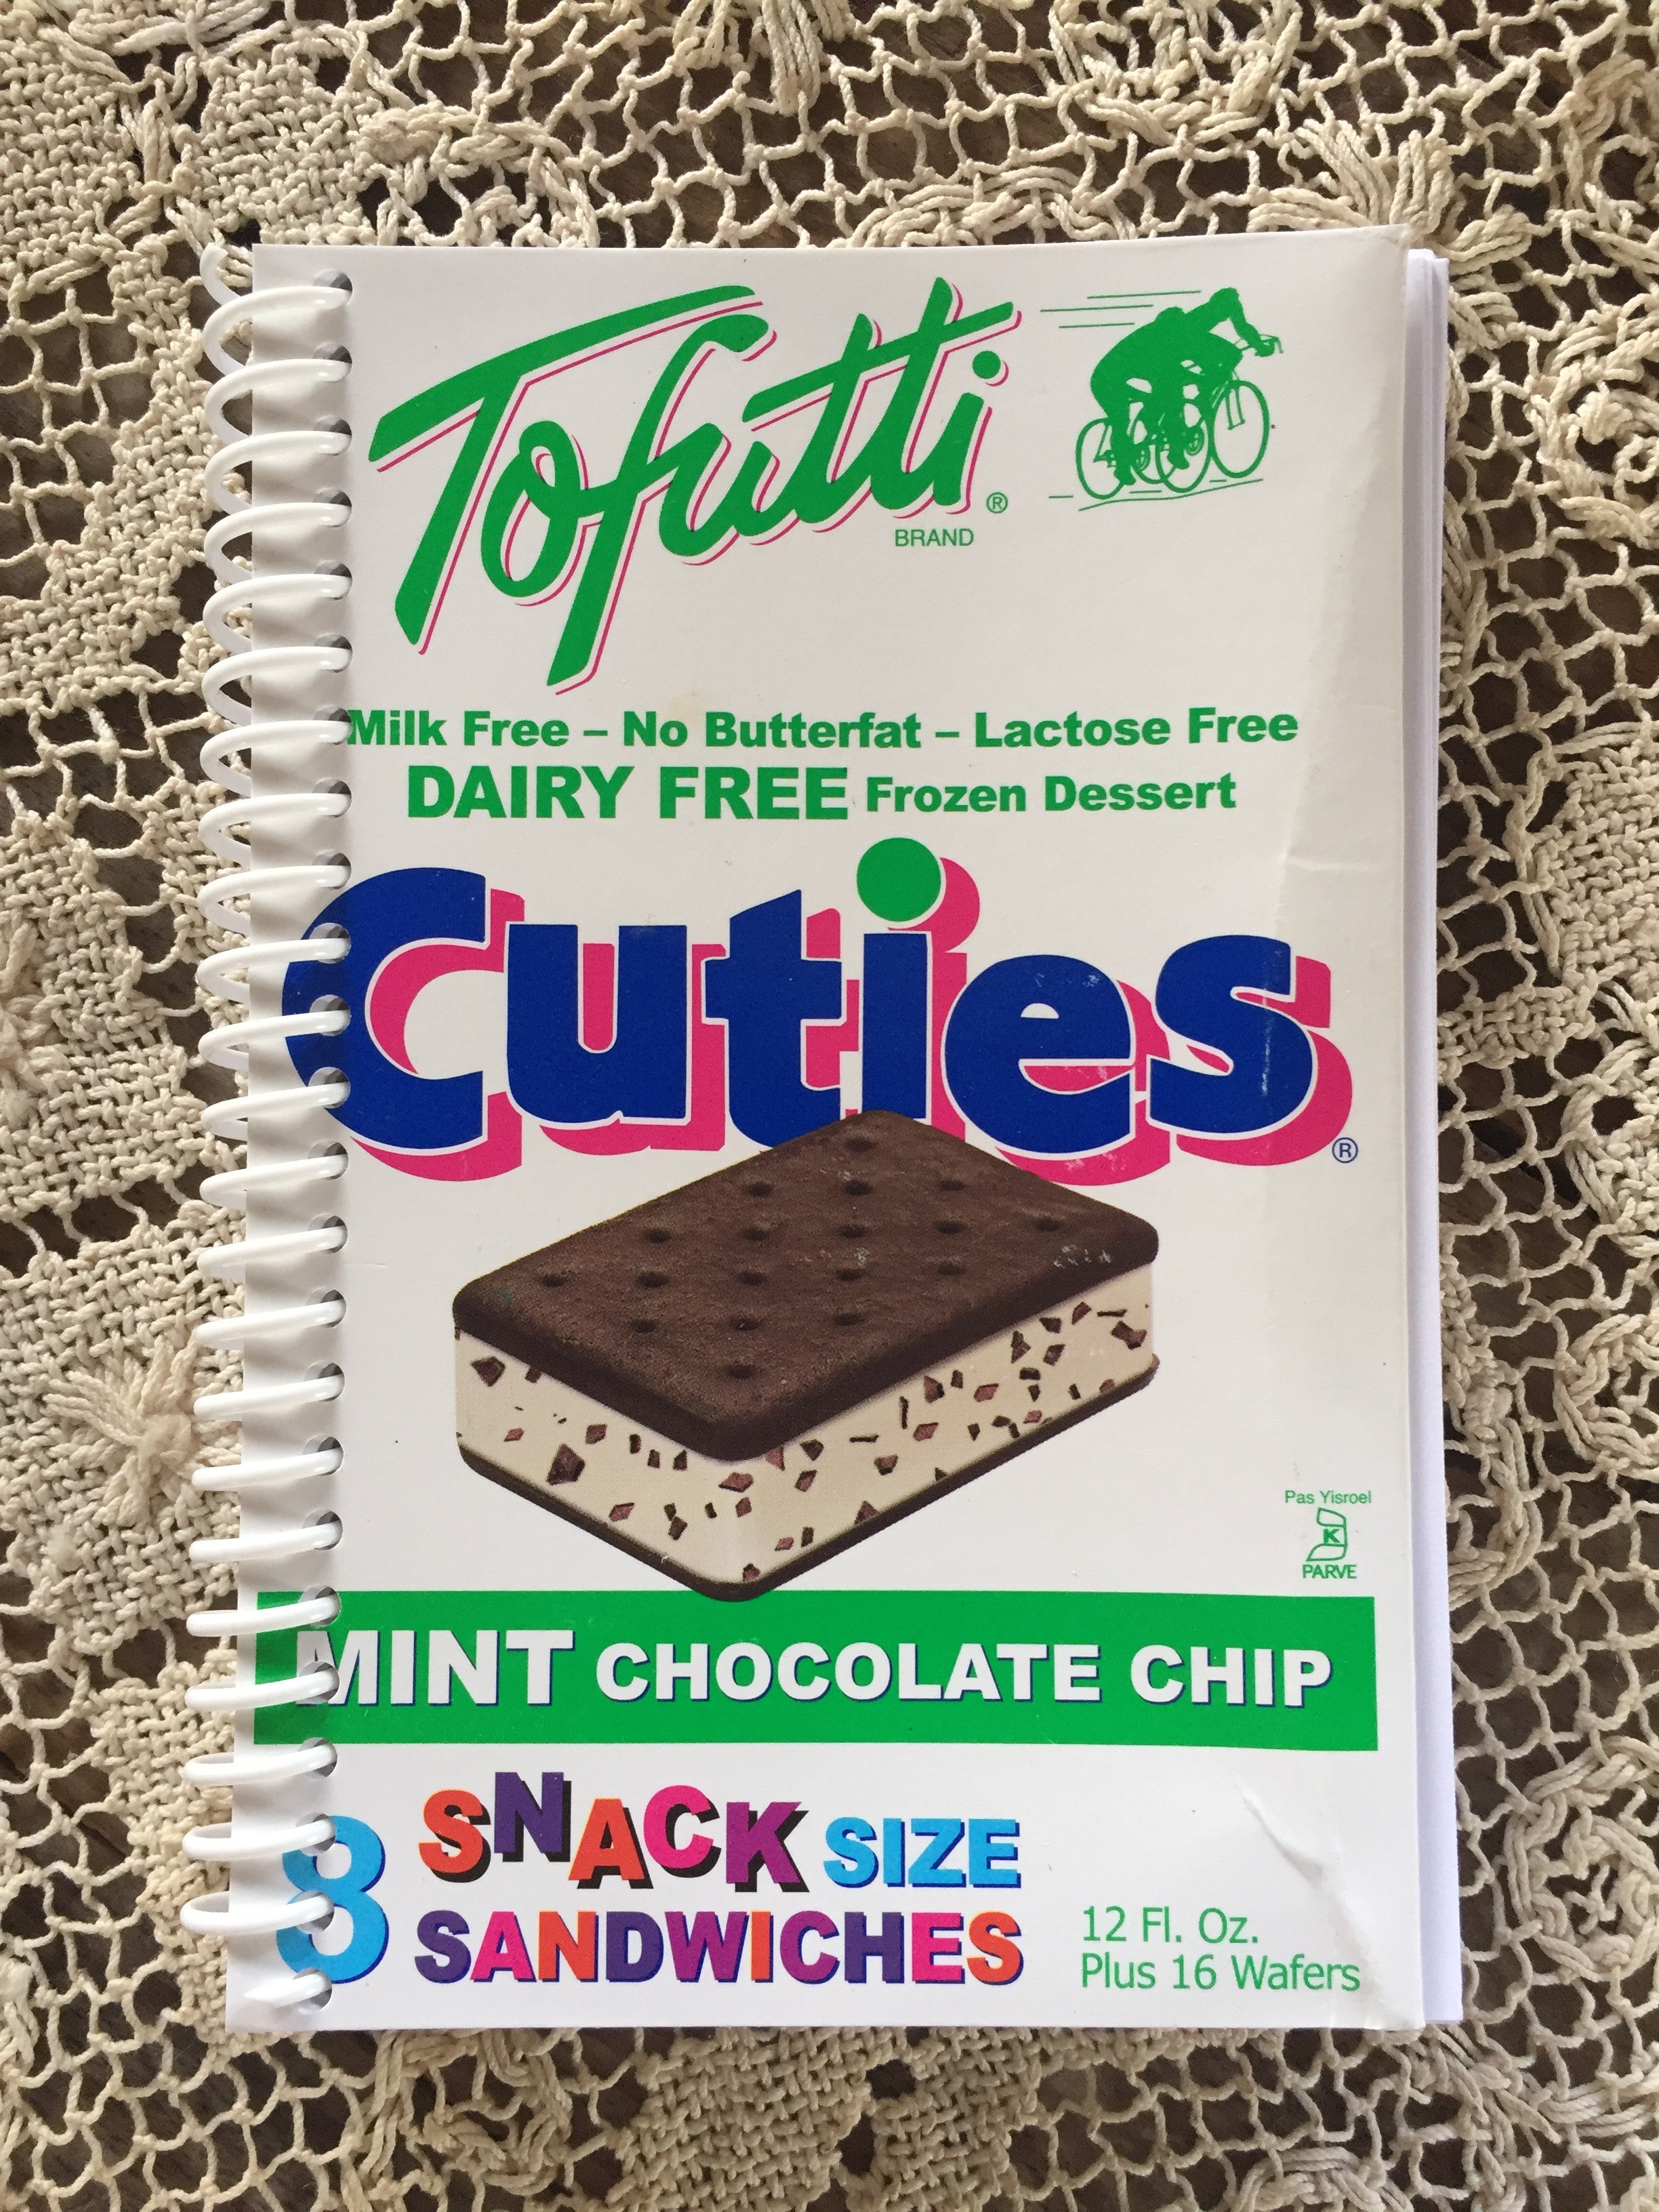 Tofutti Cuties Recycled Notebook